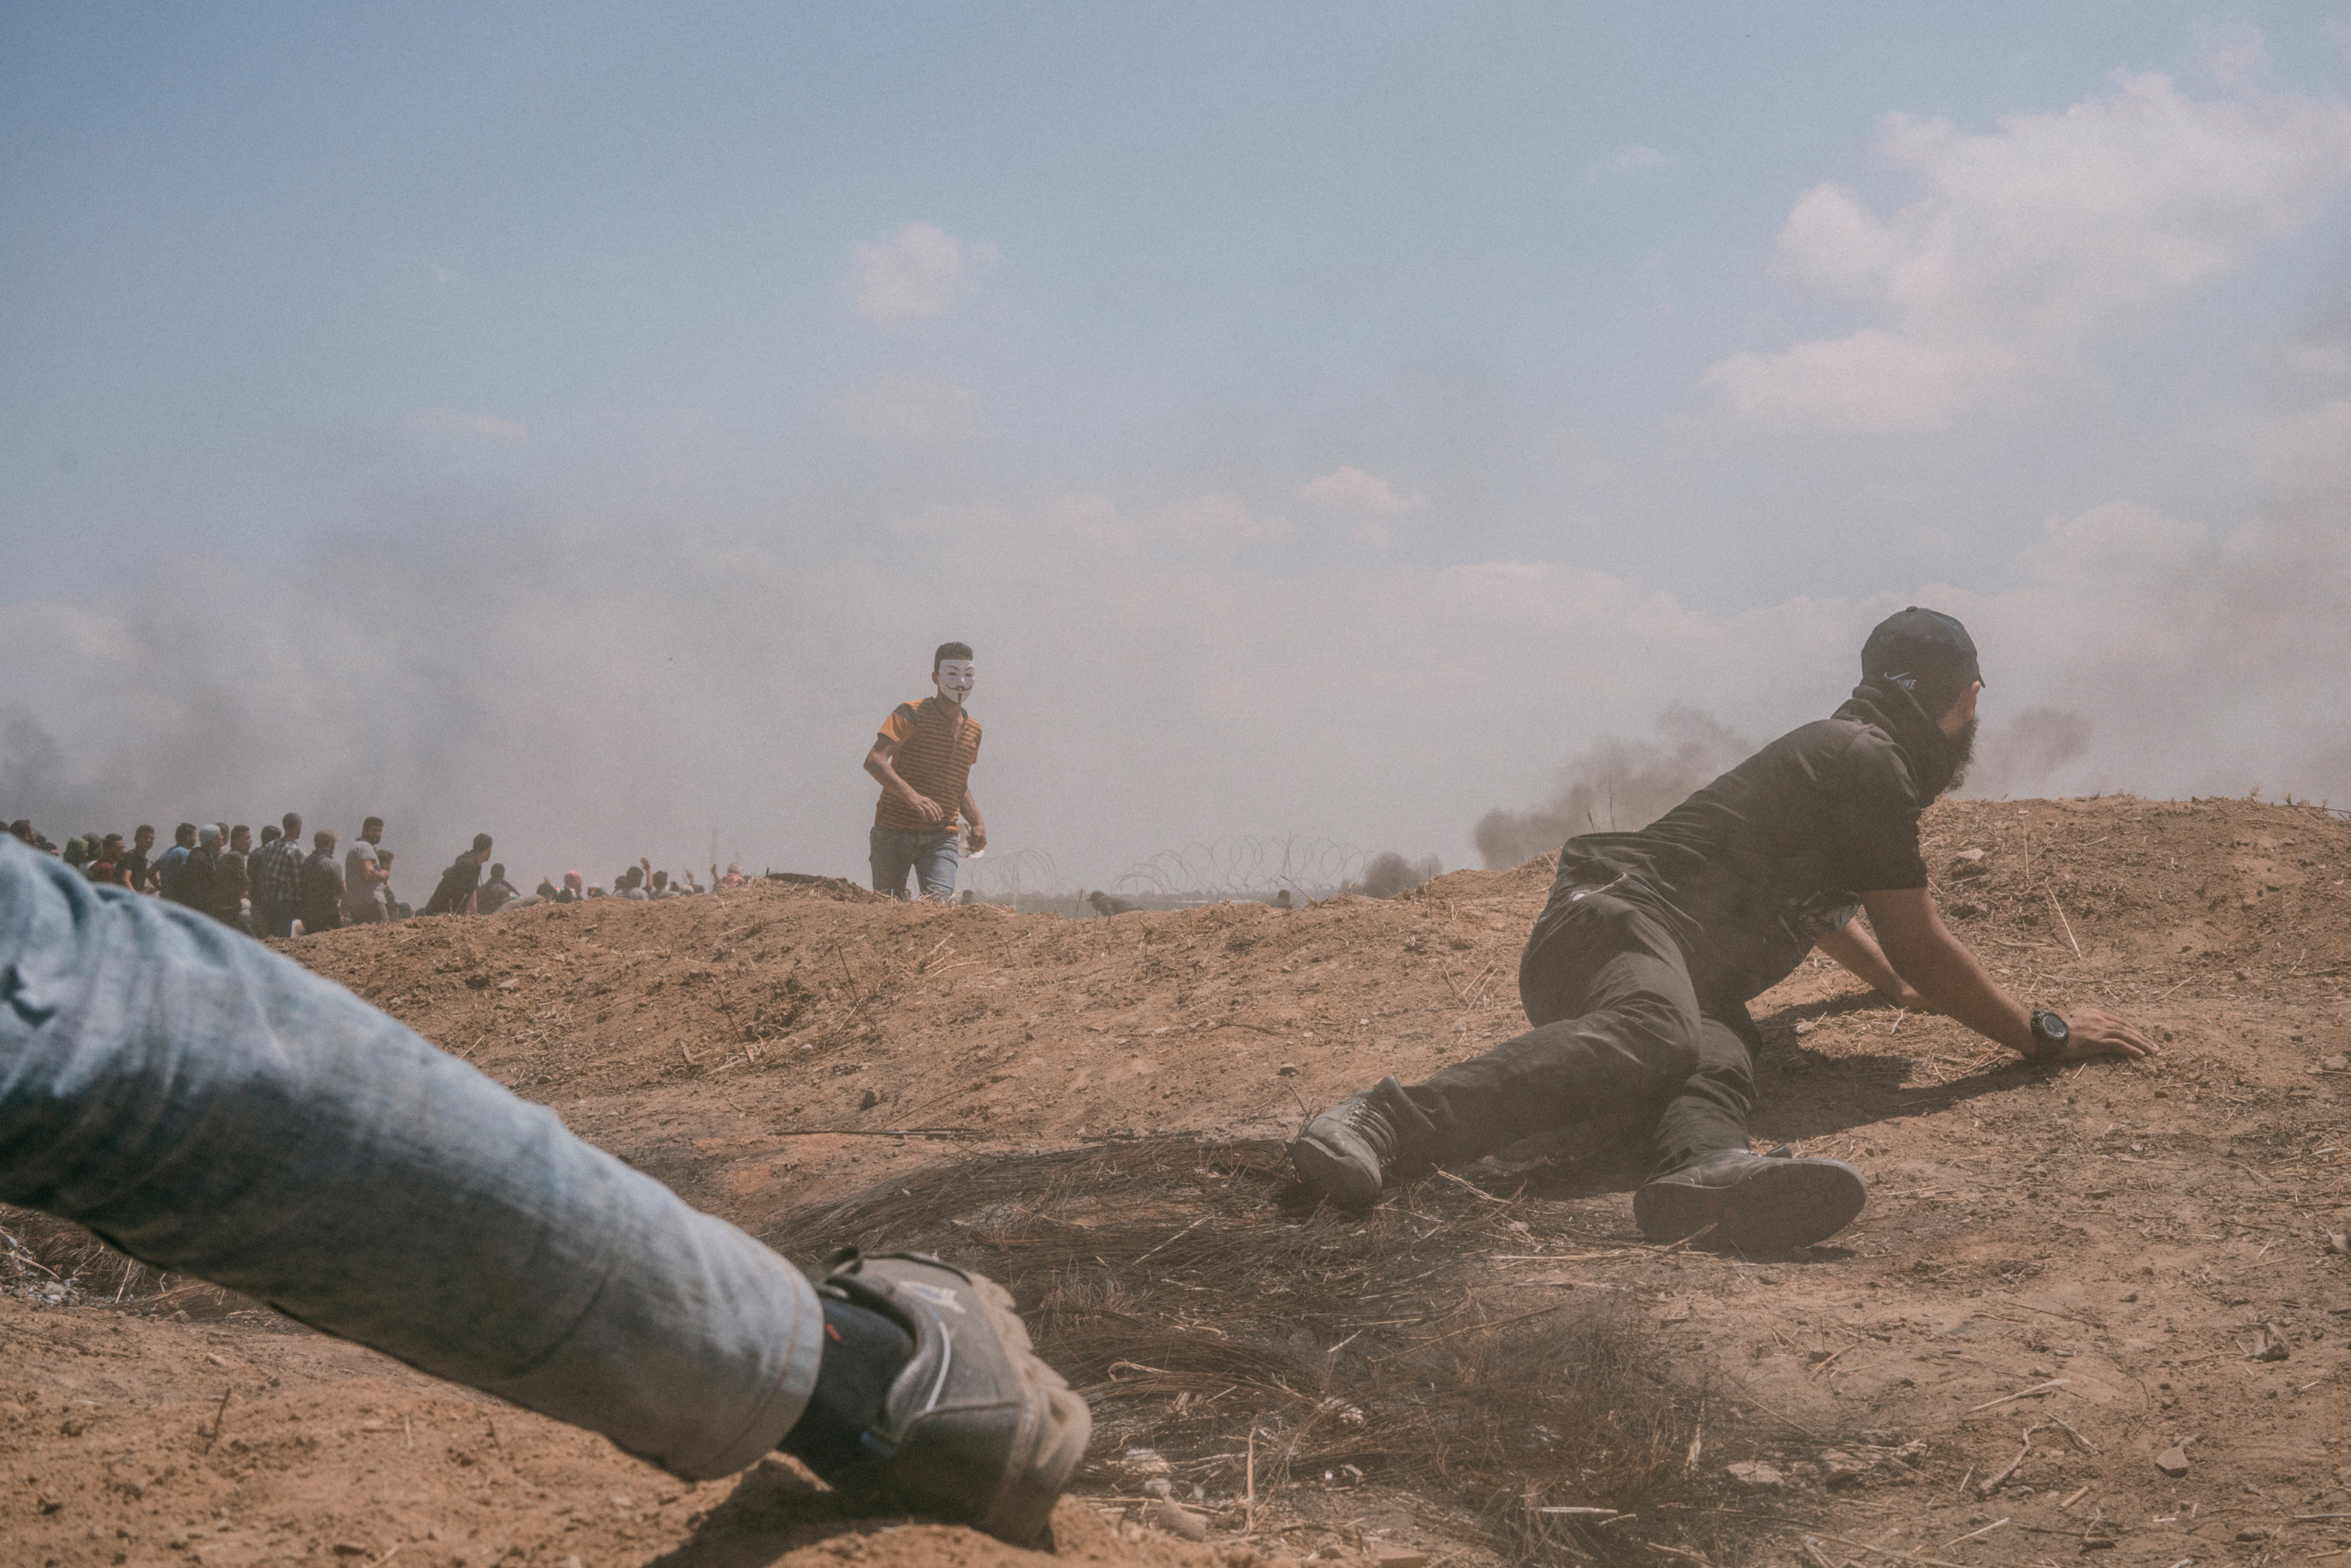 A man hides behind an embankment during the protest along the Gaza-Israel border. (Emanuele Satolli for TIME)